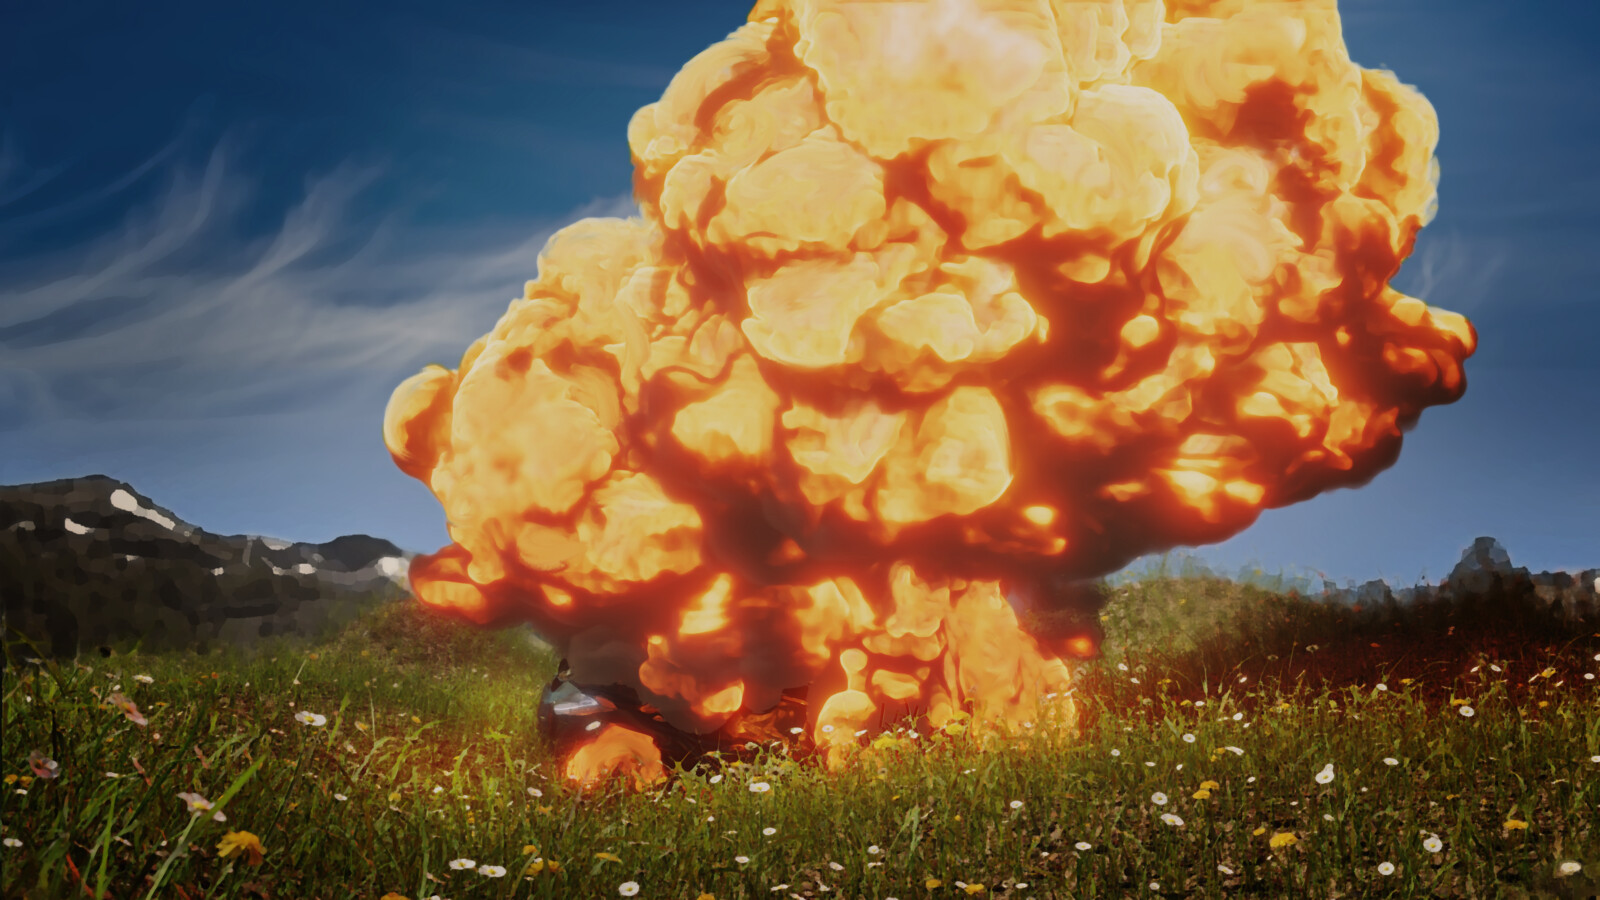 Cheery Explosion - Daily Render 